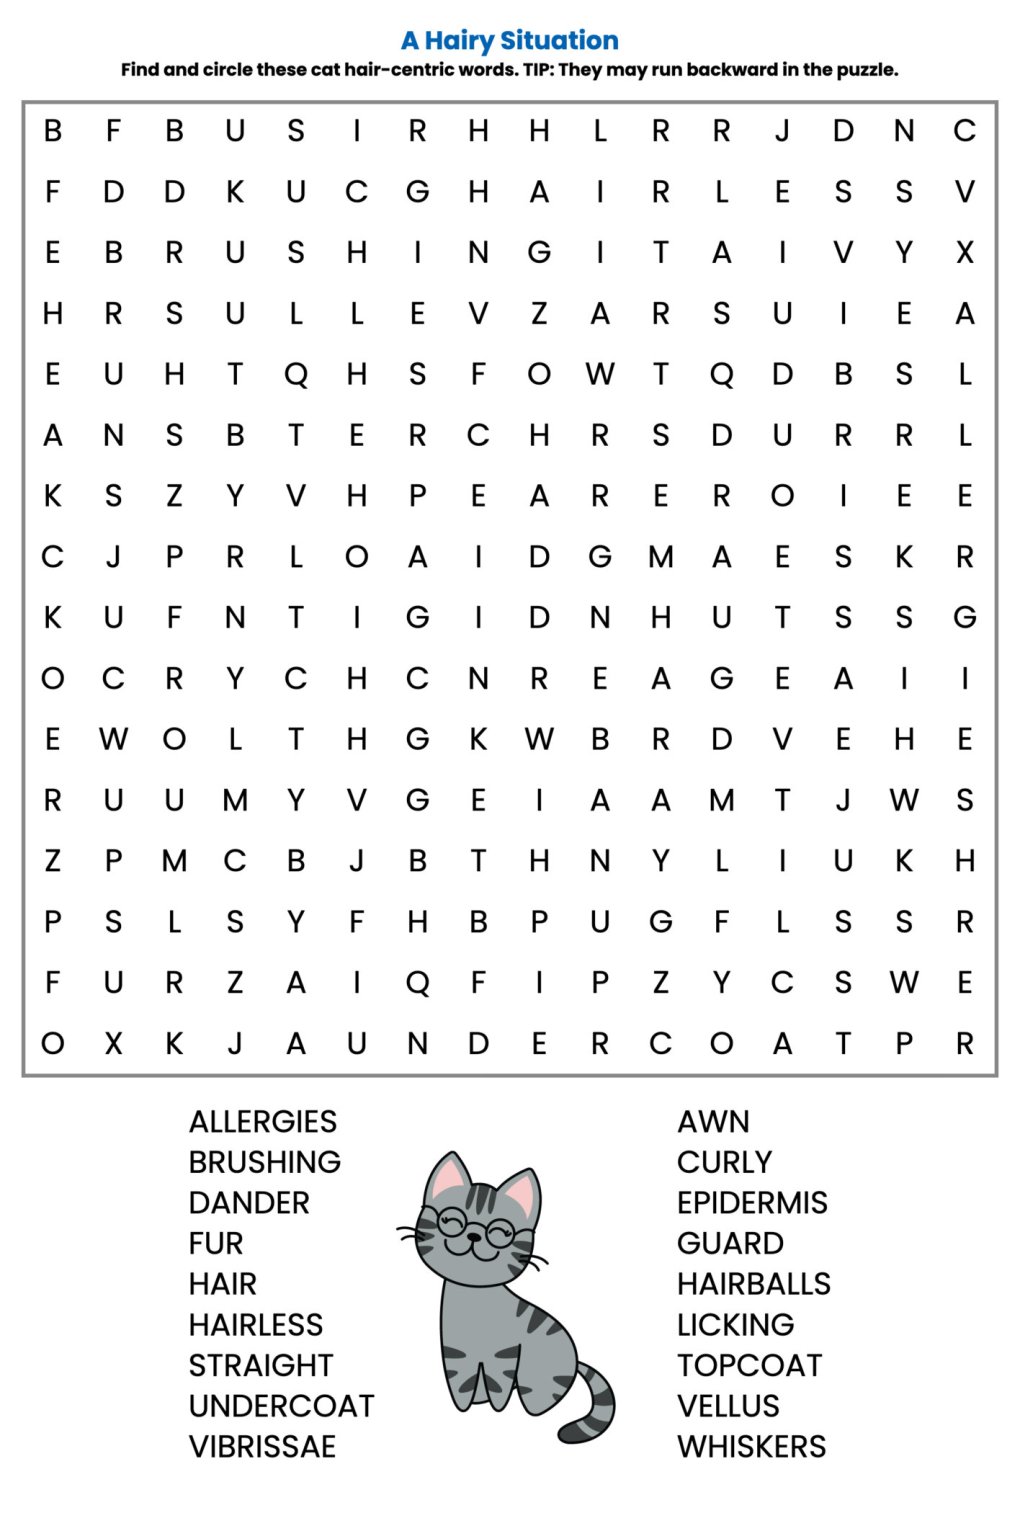 Weekly Cat Word Puzzle – A Hairy Situation